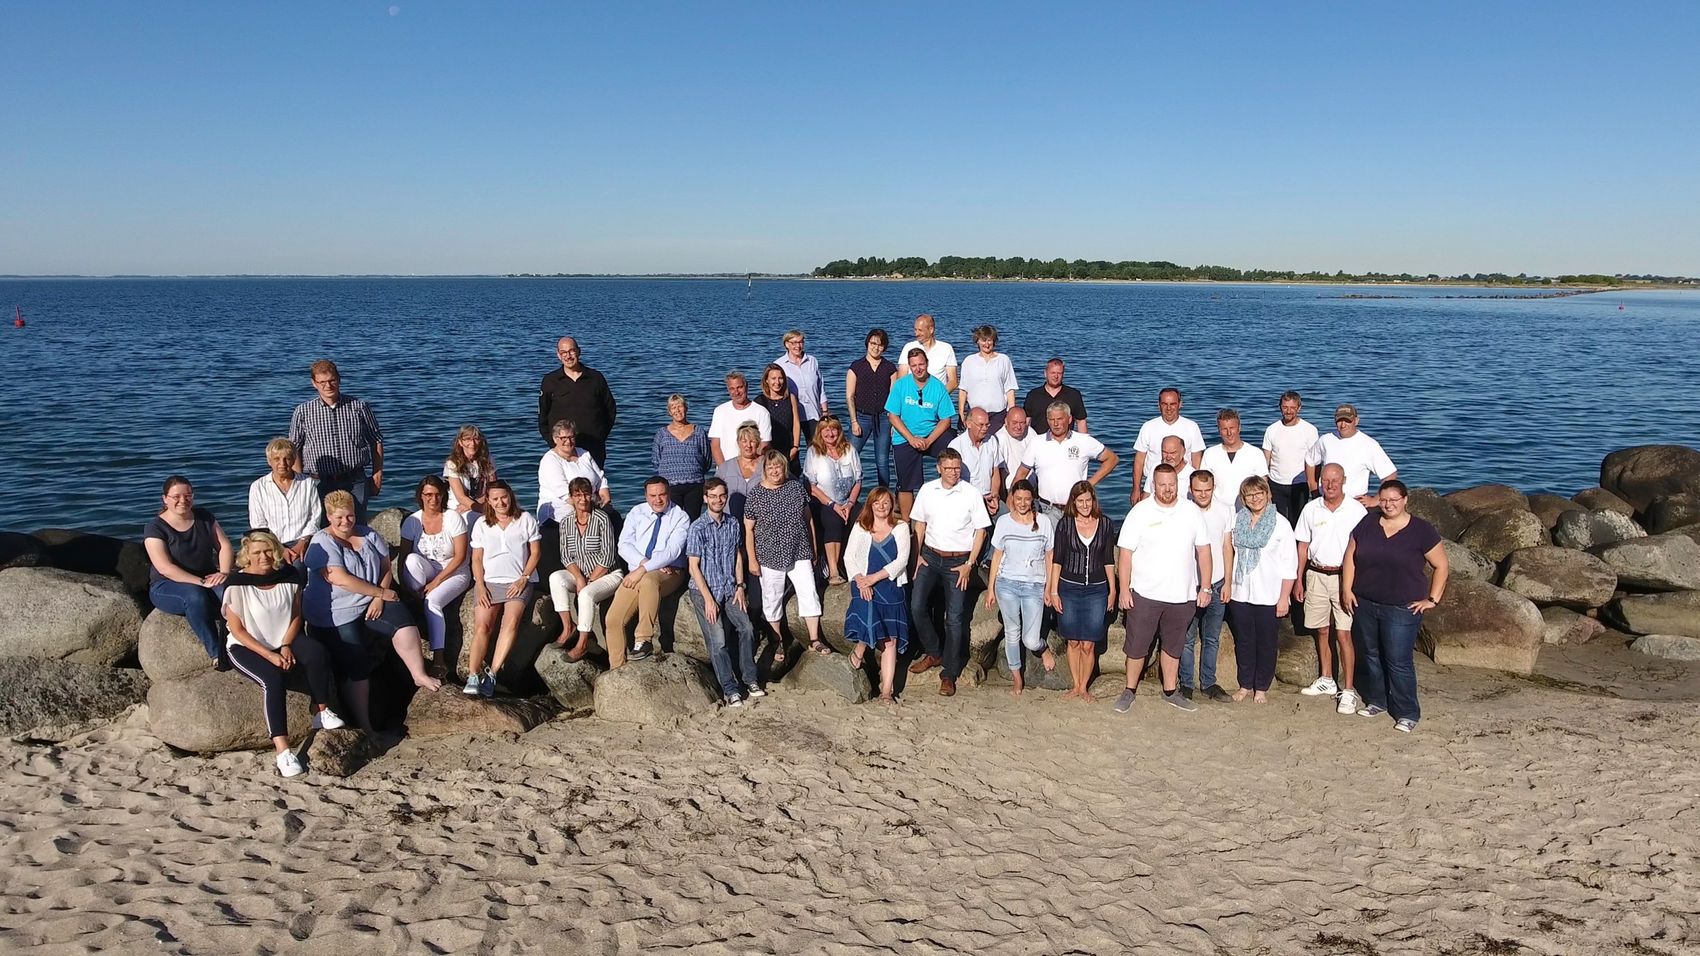 The Fehmarn Tourism Board Team